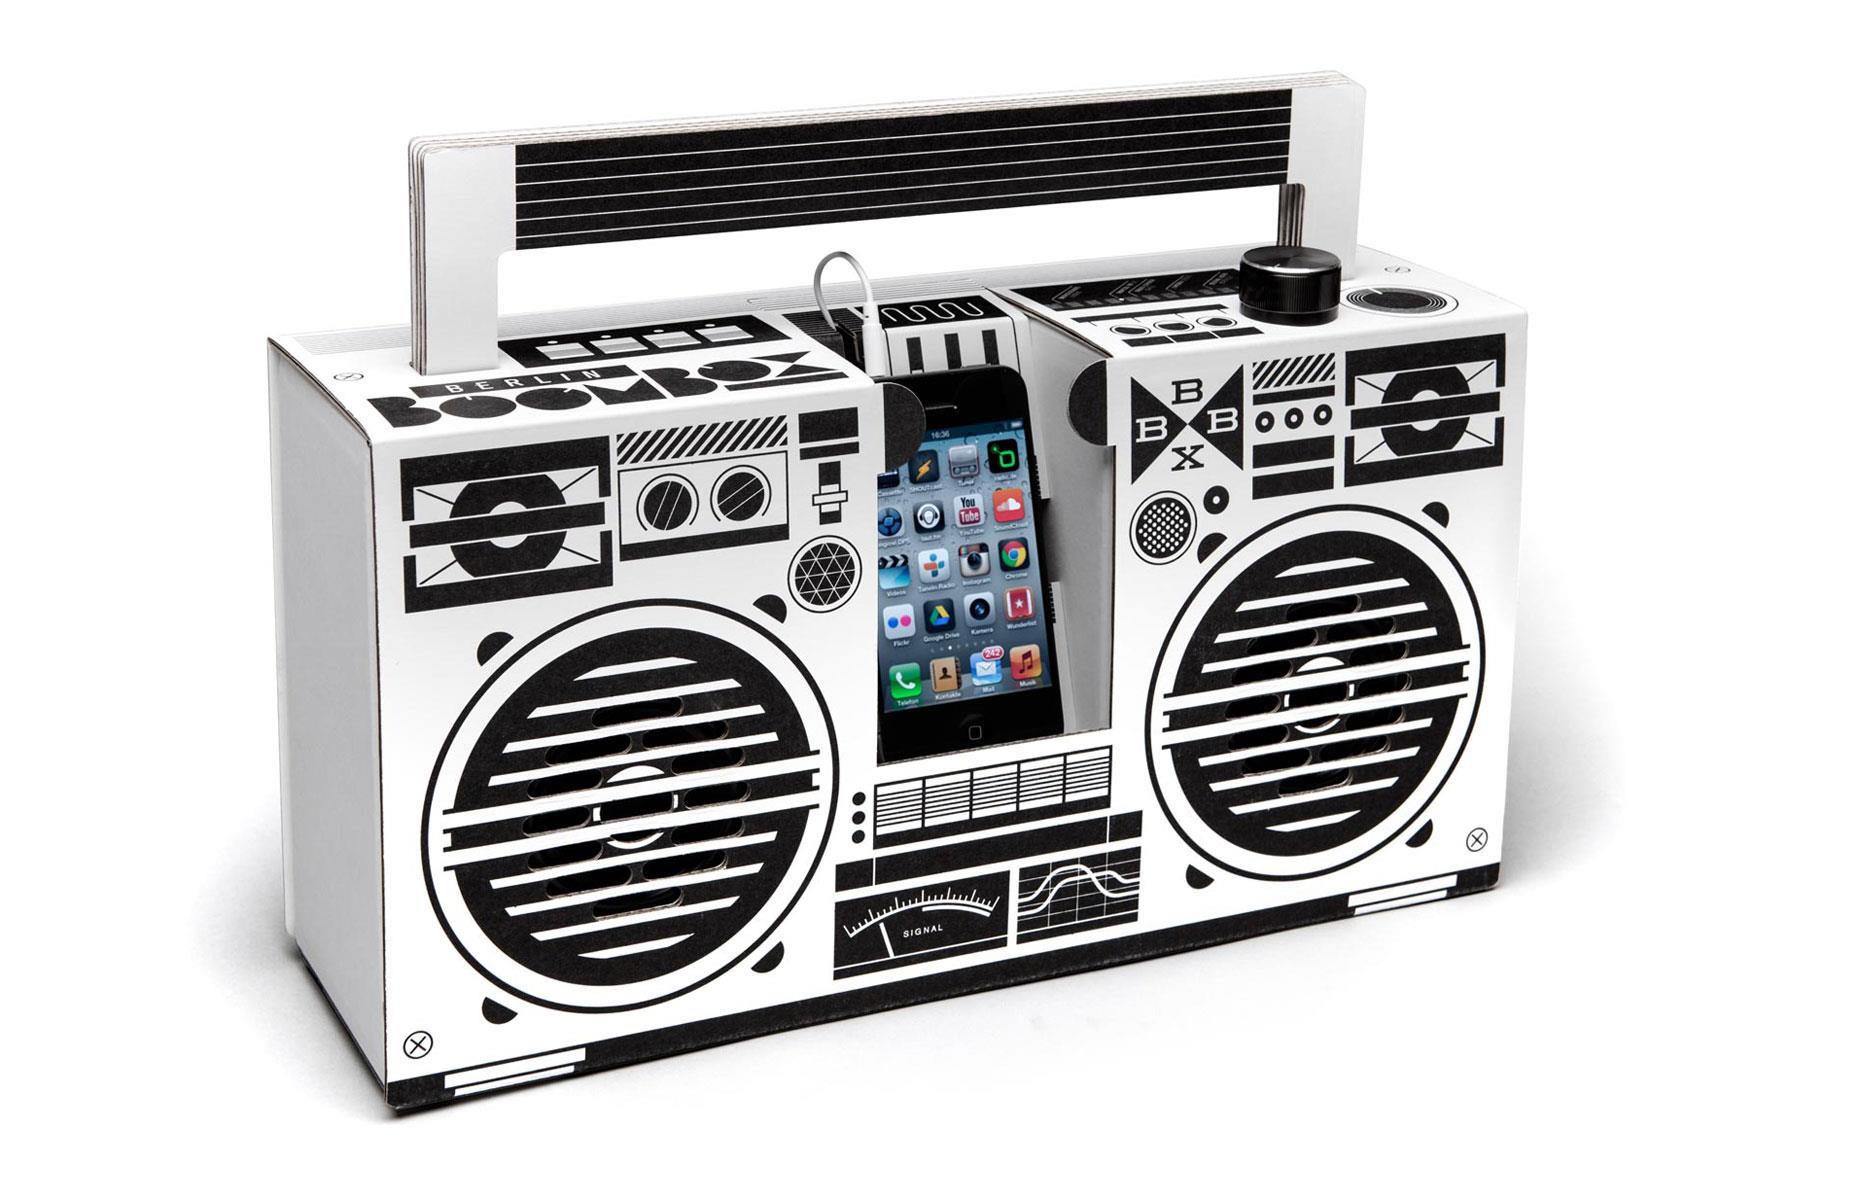 Boombox – from $66 (£54)